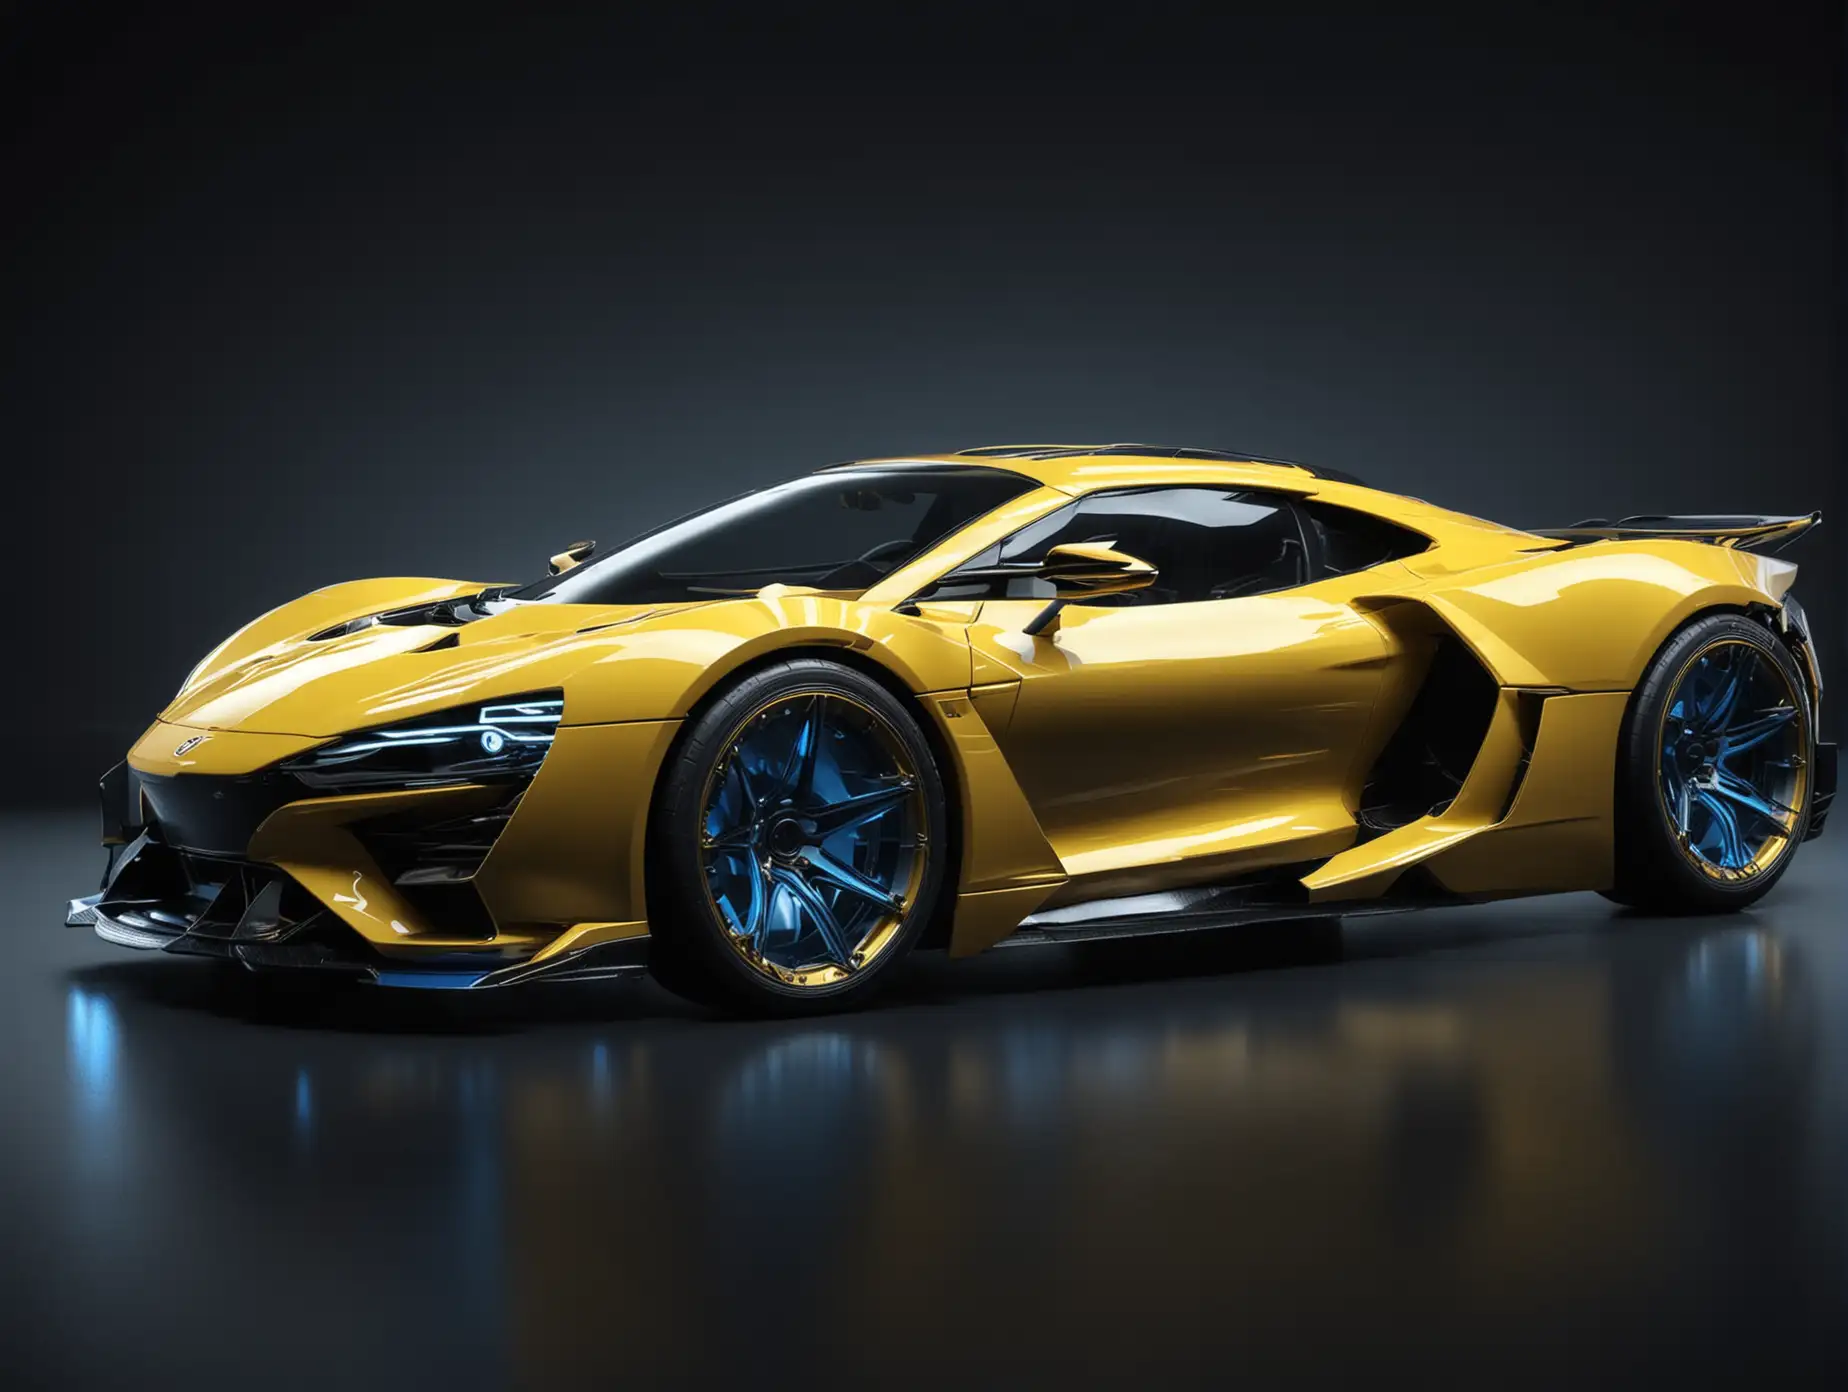 futuristic beautiful sports car in yellow color on a black background seen only from the side and the chassis lit from below with blue lights